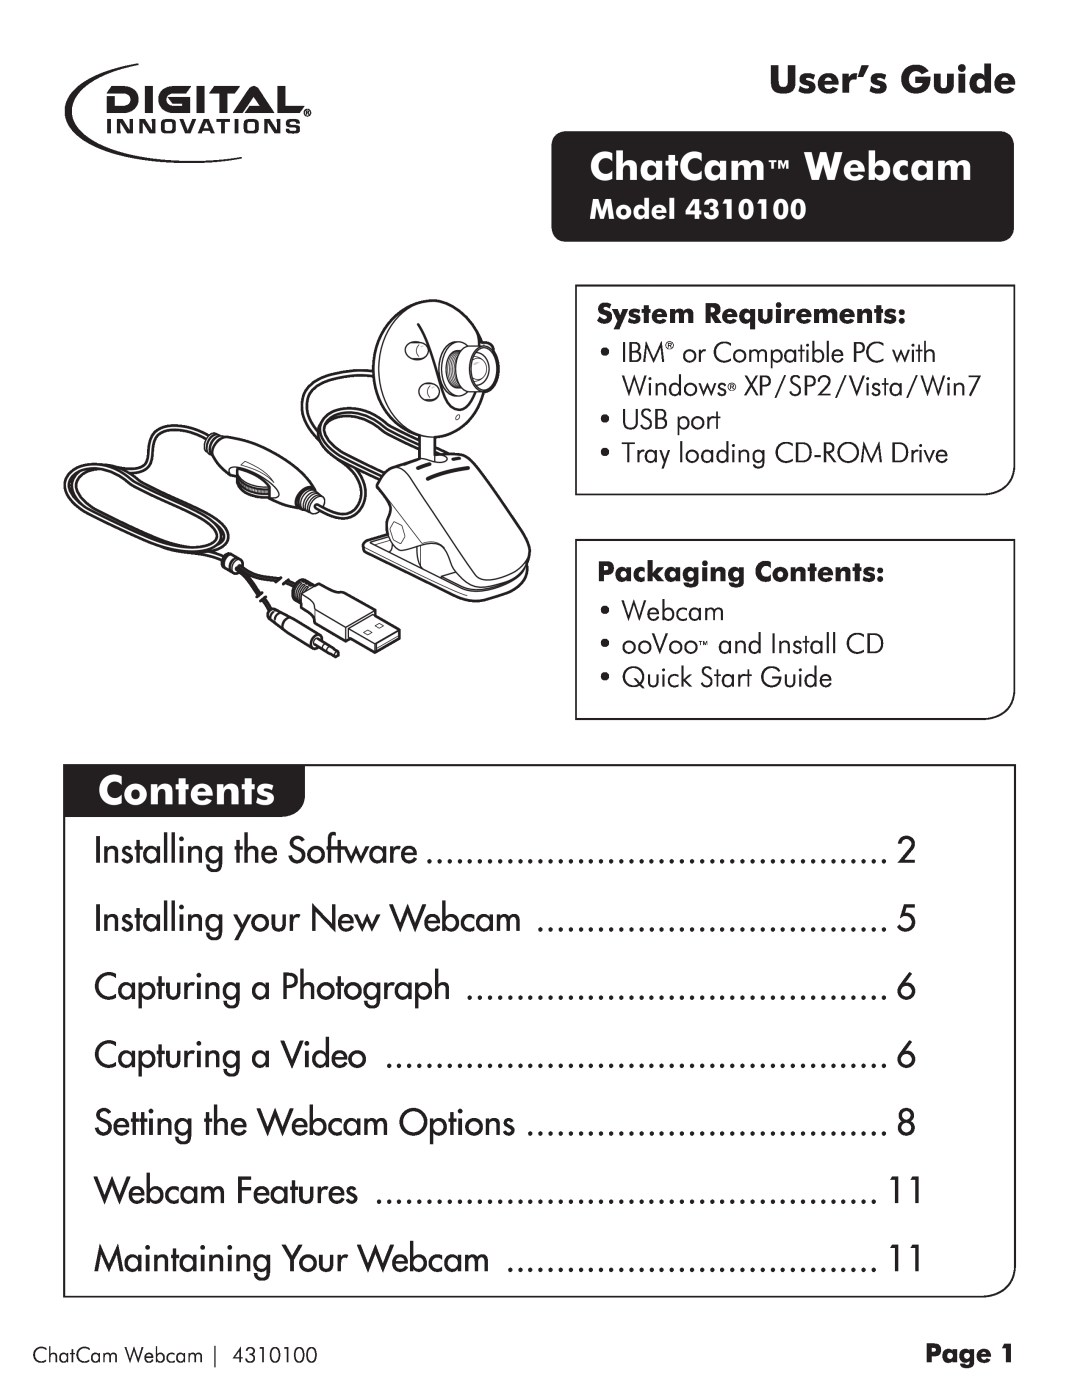 Micro Innovations 4310100 quick start User’s Guide, ChatCam Webcam, Contents, Installing the Software, Capturing a Video 